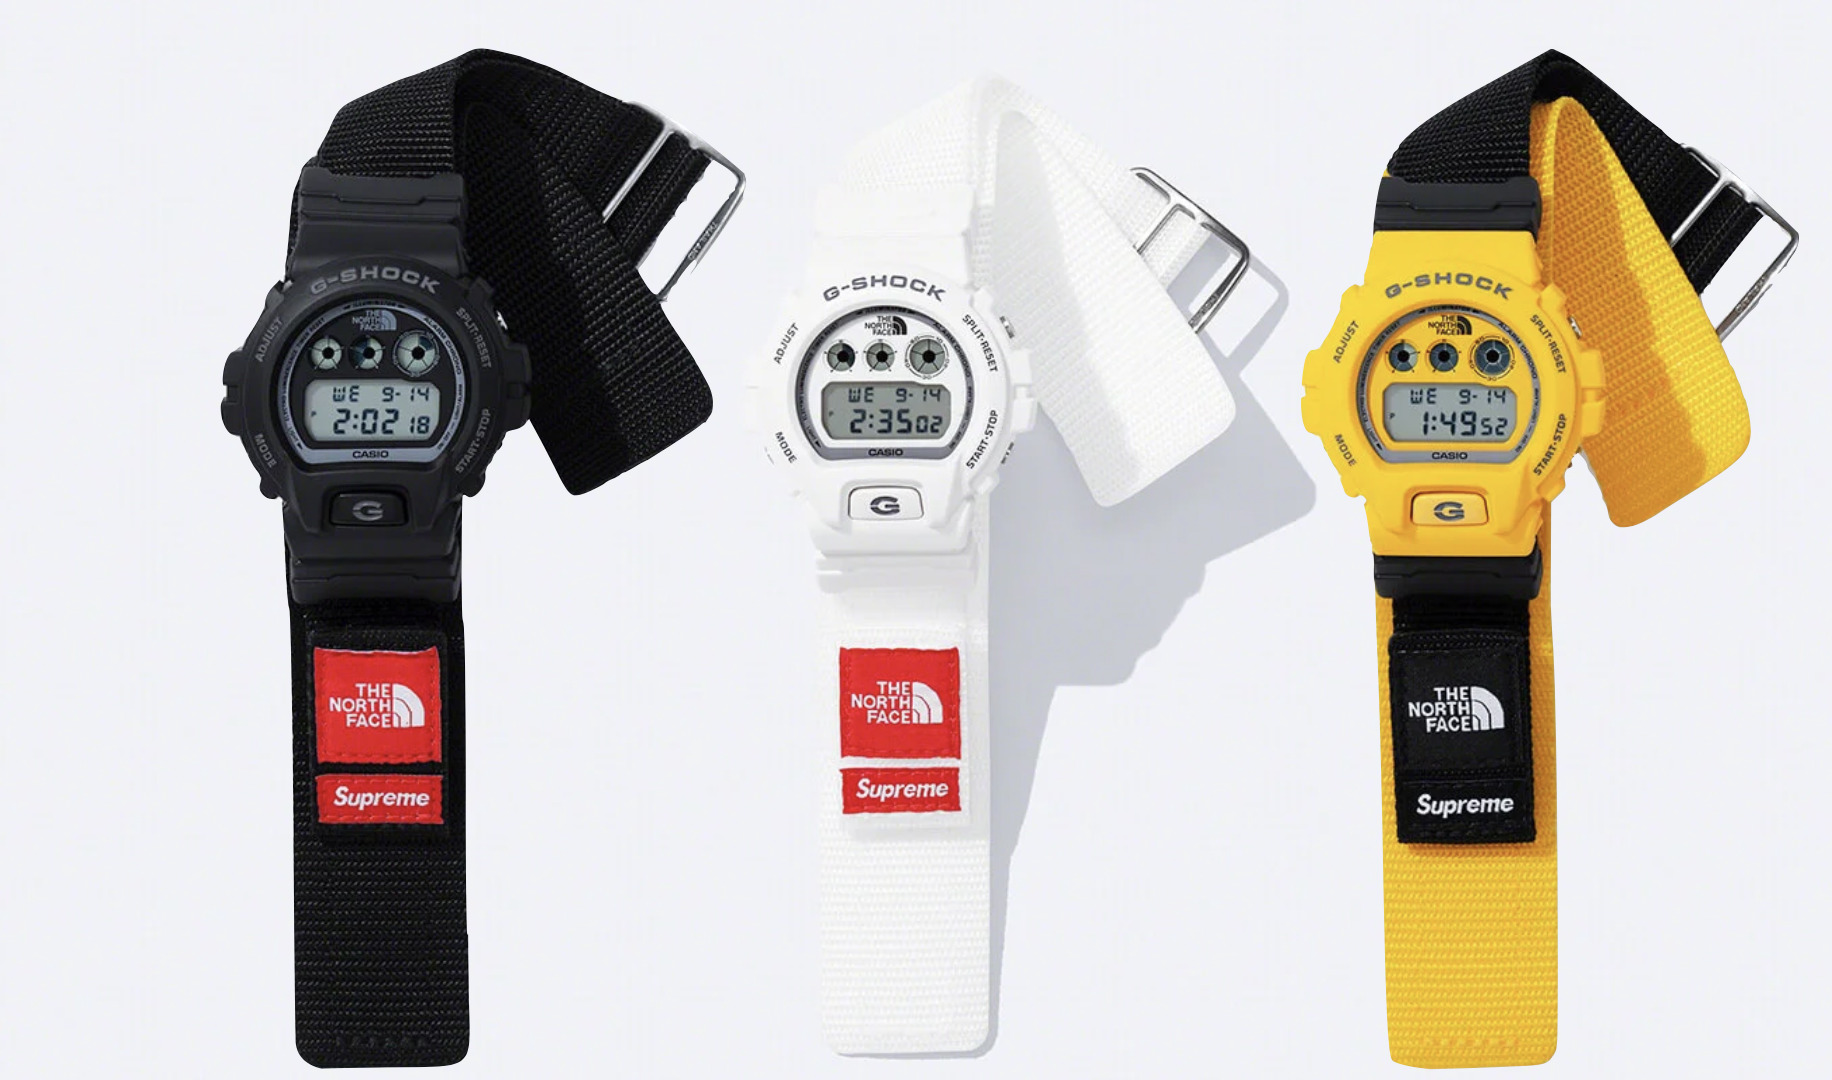 The North Face & Supreme Casio G-Shock Is A Bulletproof Collaboration